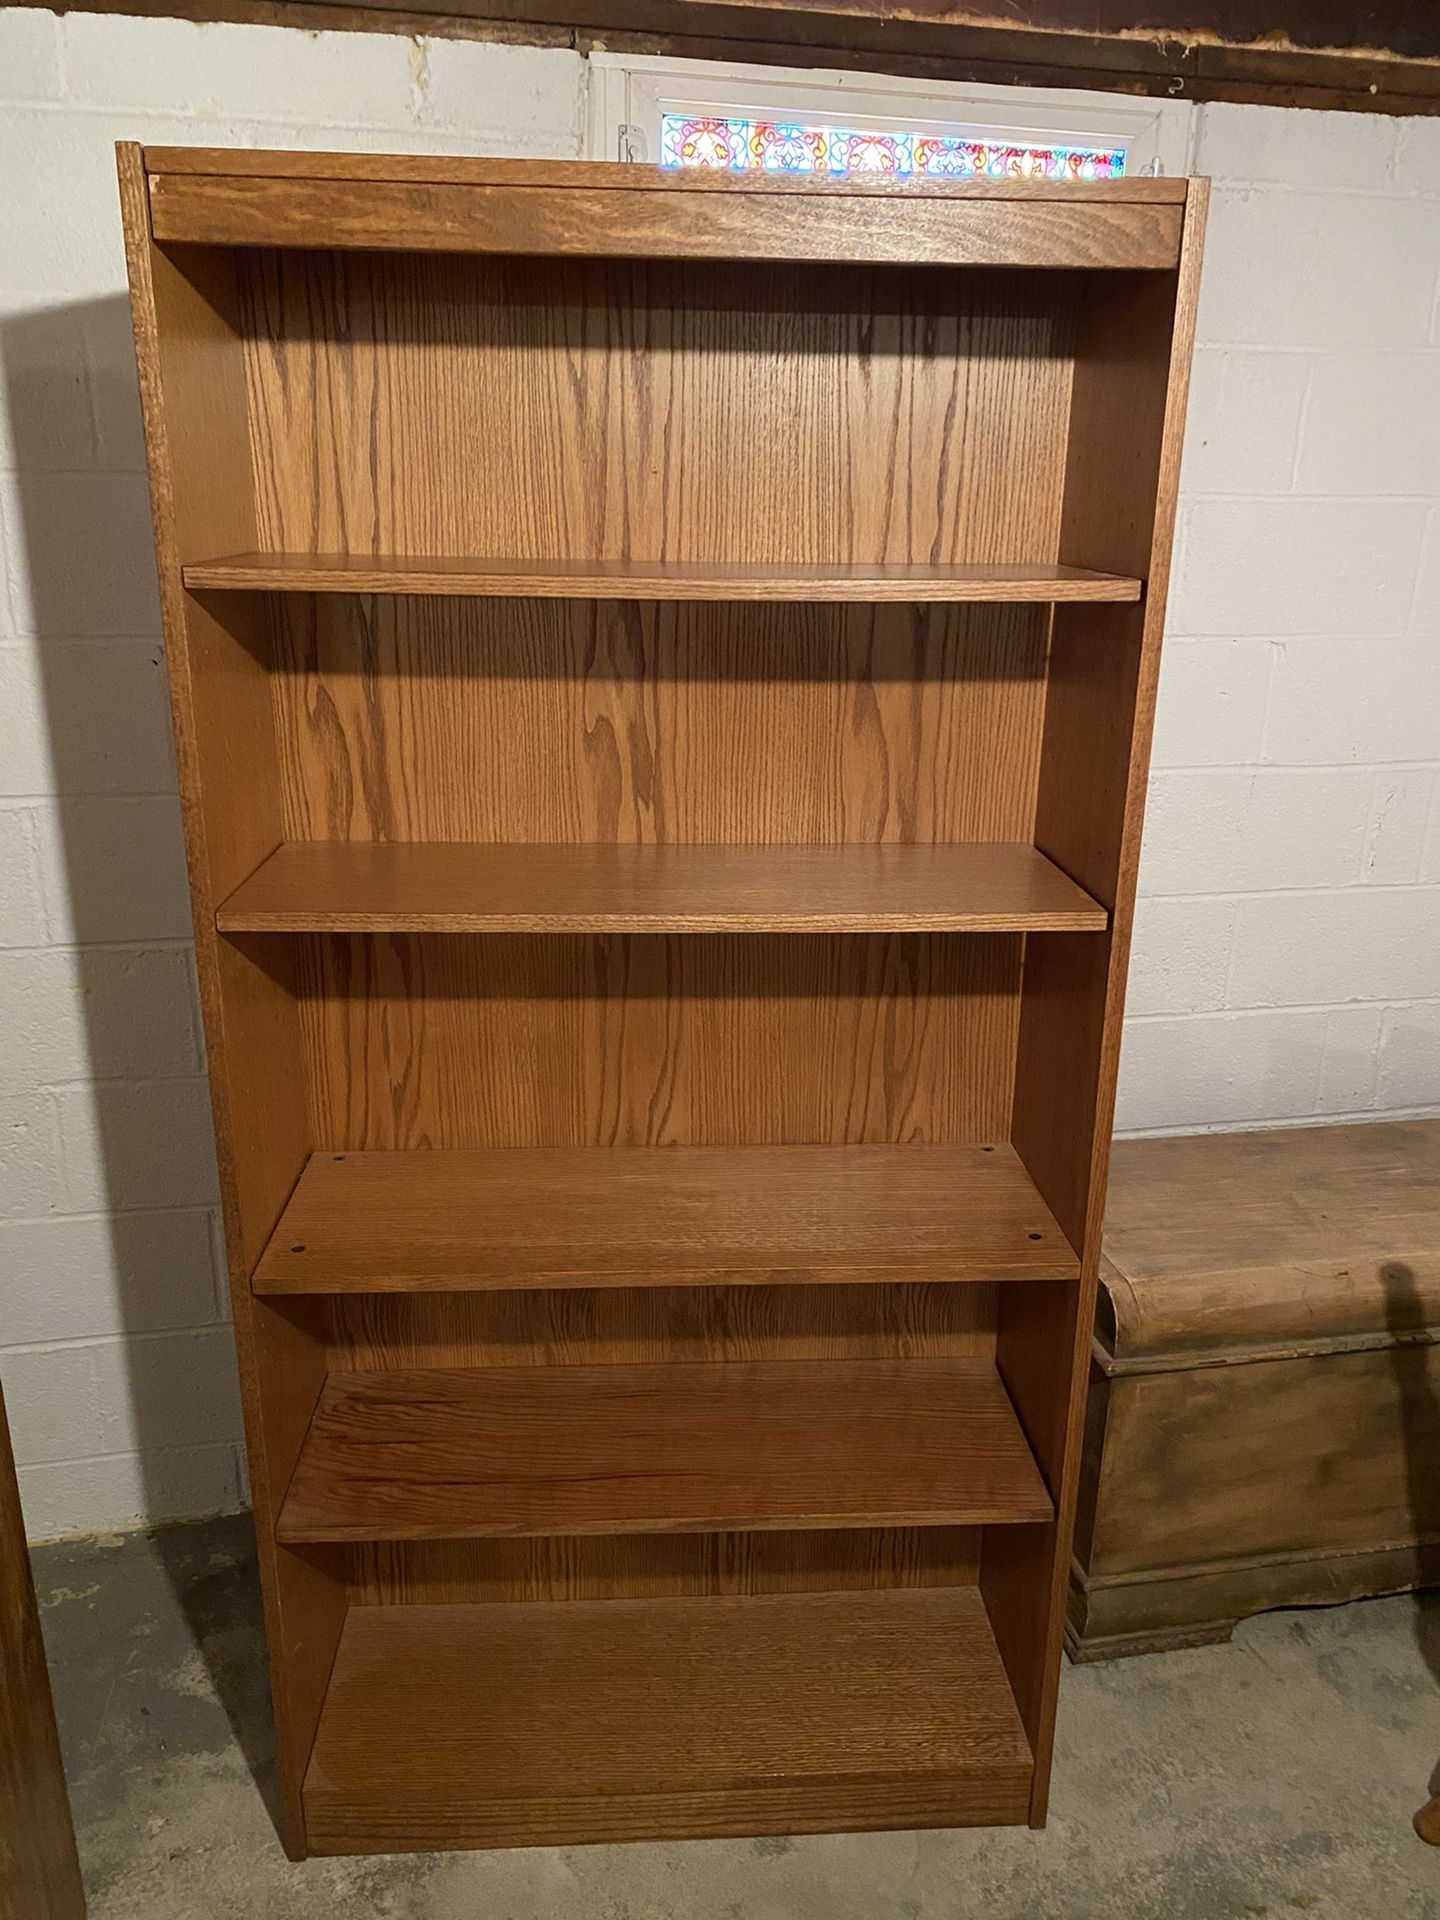 Wooden shelving unit in very good condition.